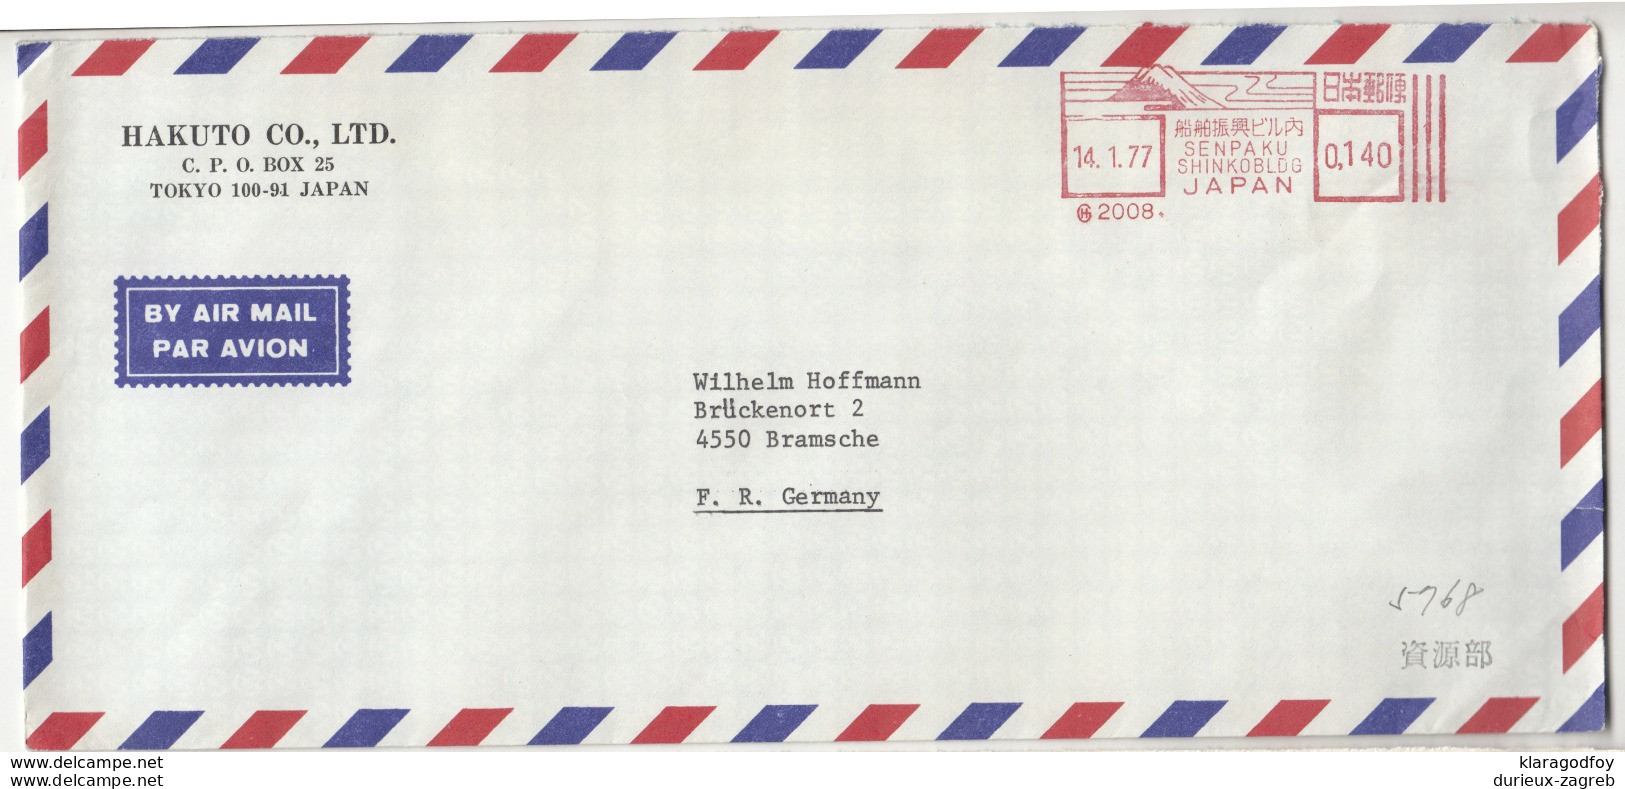 Hakuto Co., Tokyo Company Air Mail Letter Cover Travelled 1977 To Germany - Senpaku Shinkoblog Meter Stamp B190922 - Storia Postale